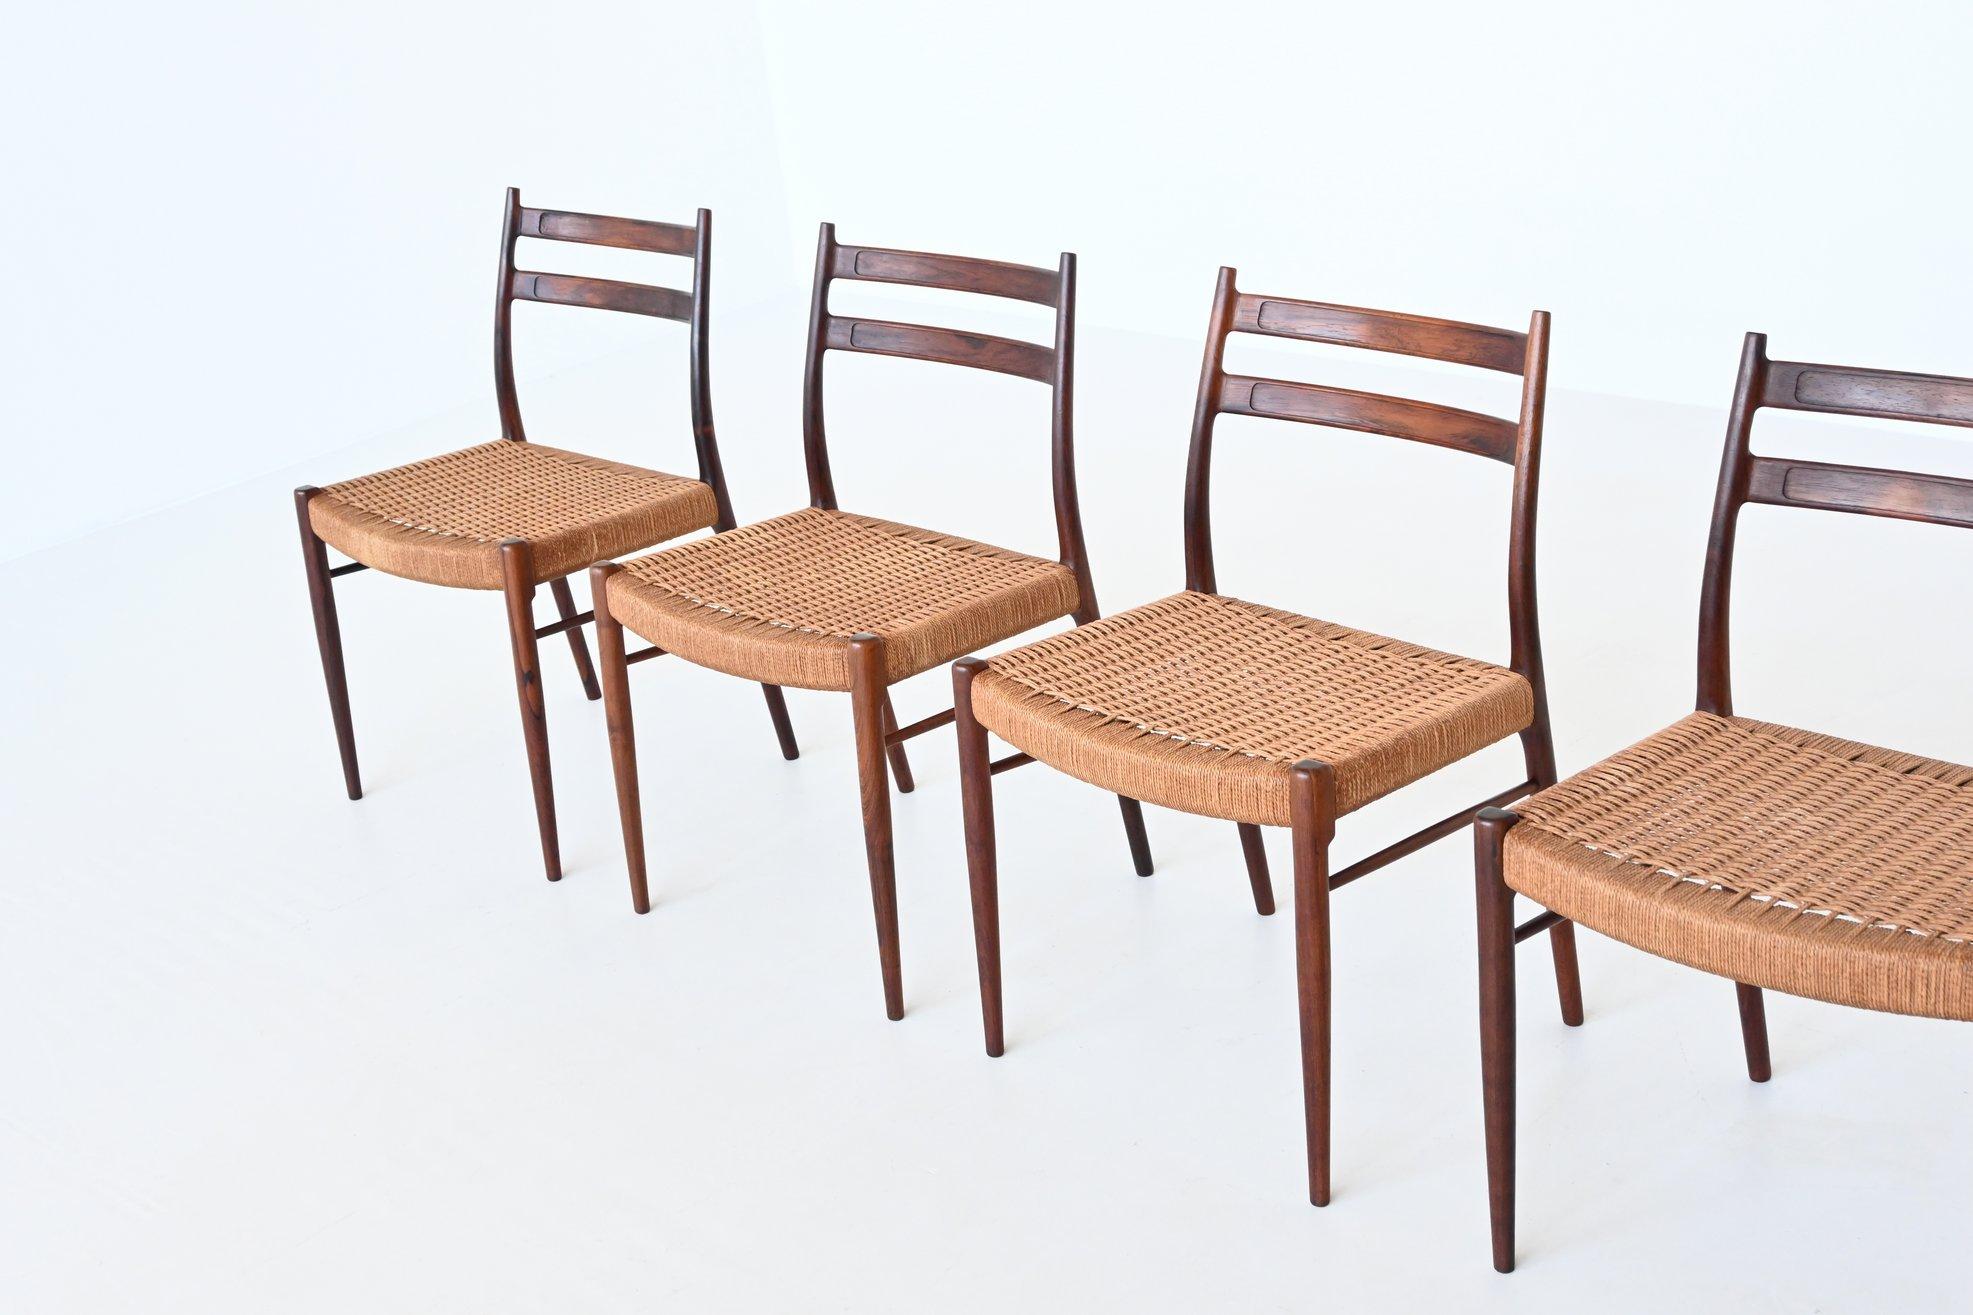 Fantastic set of six dining chairs designed by Arne Wahl Iversen and manufactured by Glyngore Stolefabrik, Denmark 1960. These well-crafted and very elegant chairs are made of solid rosewood and they are upholstered with original paper cord. The